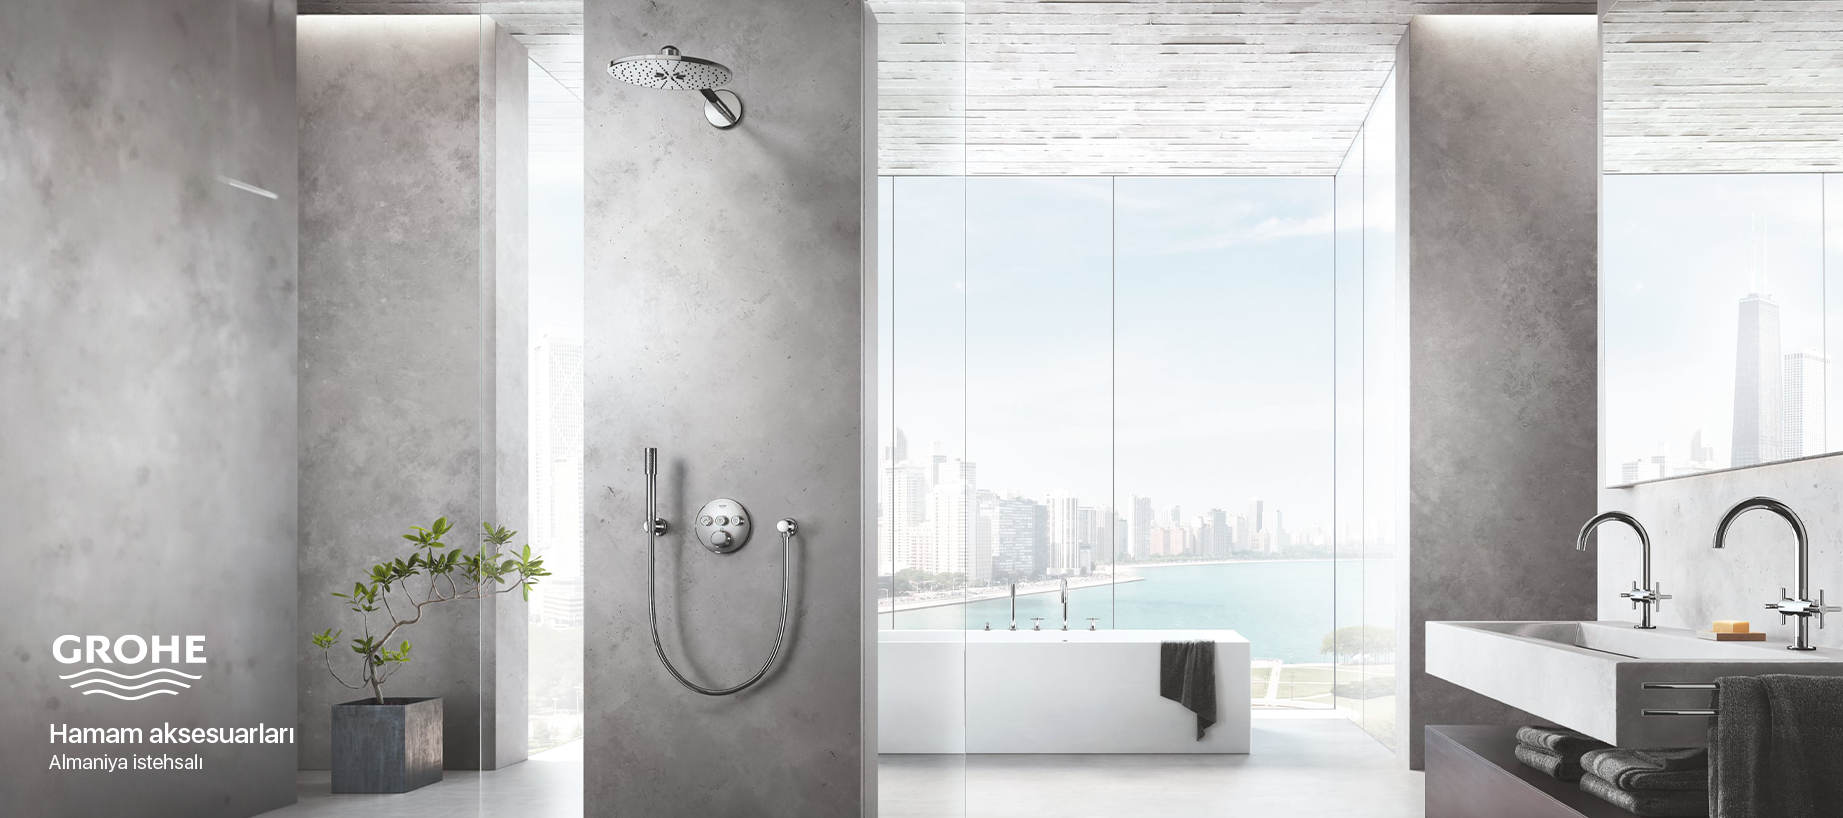 image-grohe